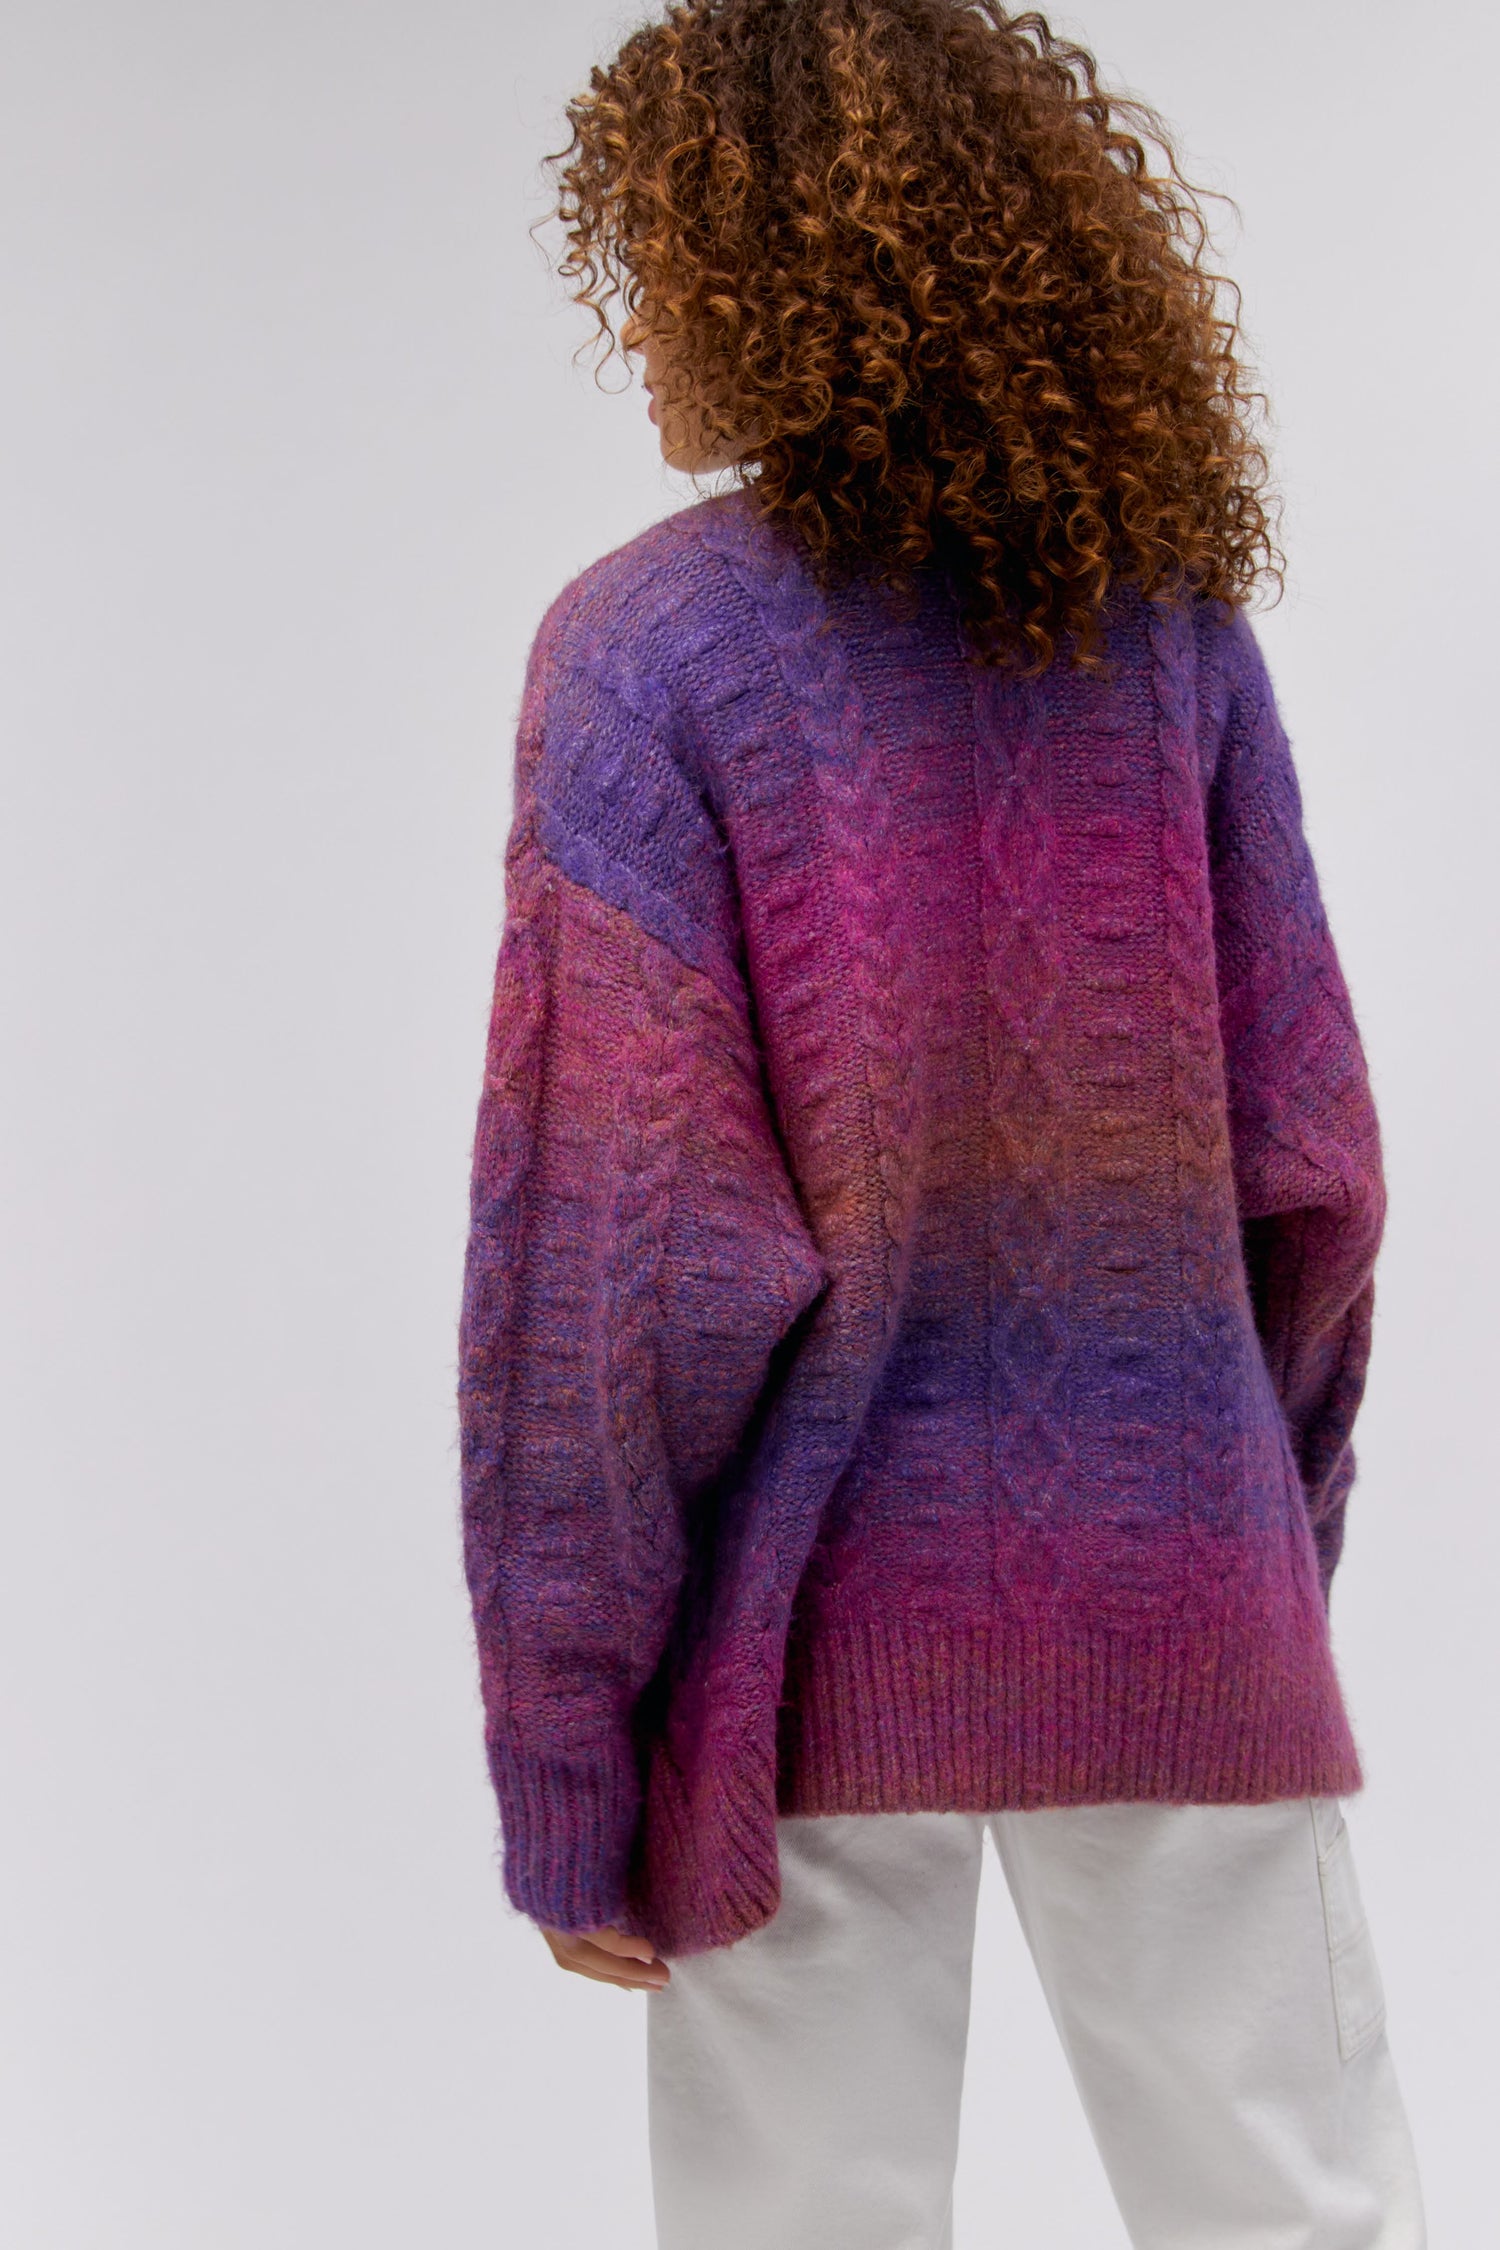 A curly-haired model featuring an ombre cardigan in Wild Orchid.